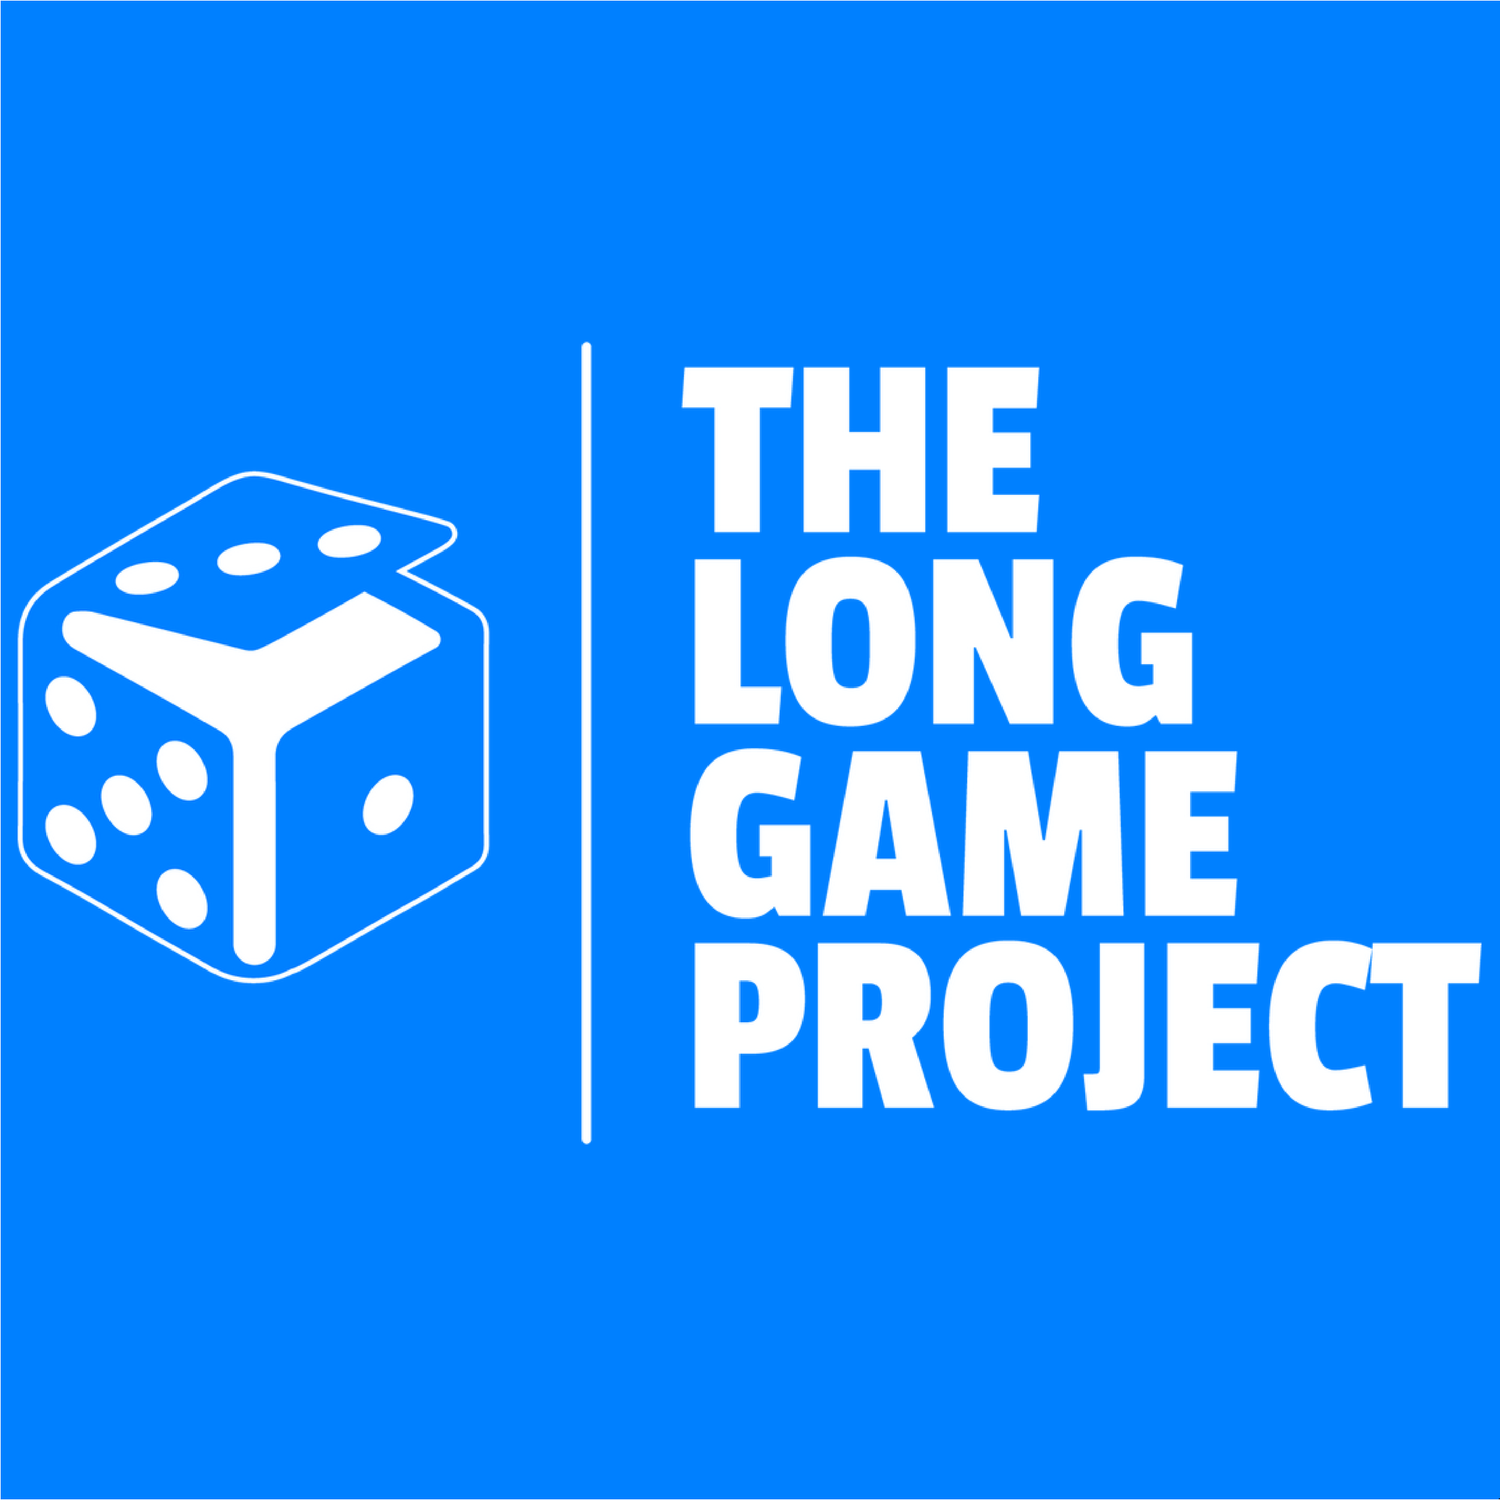 Introducing The Long Game Project: